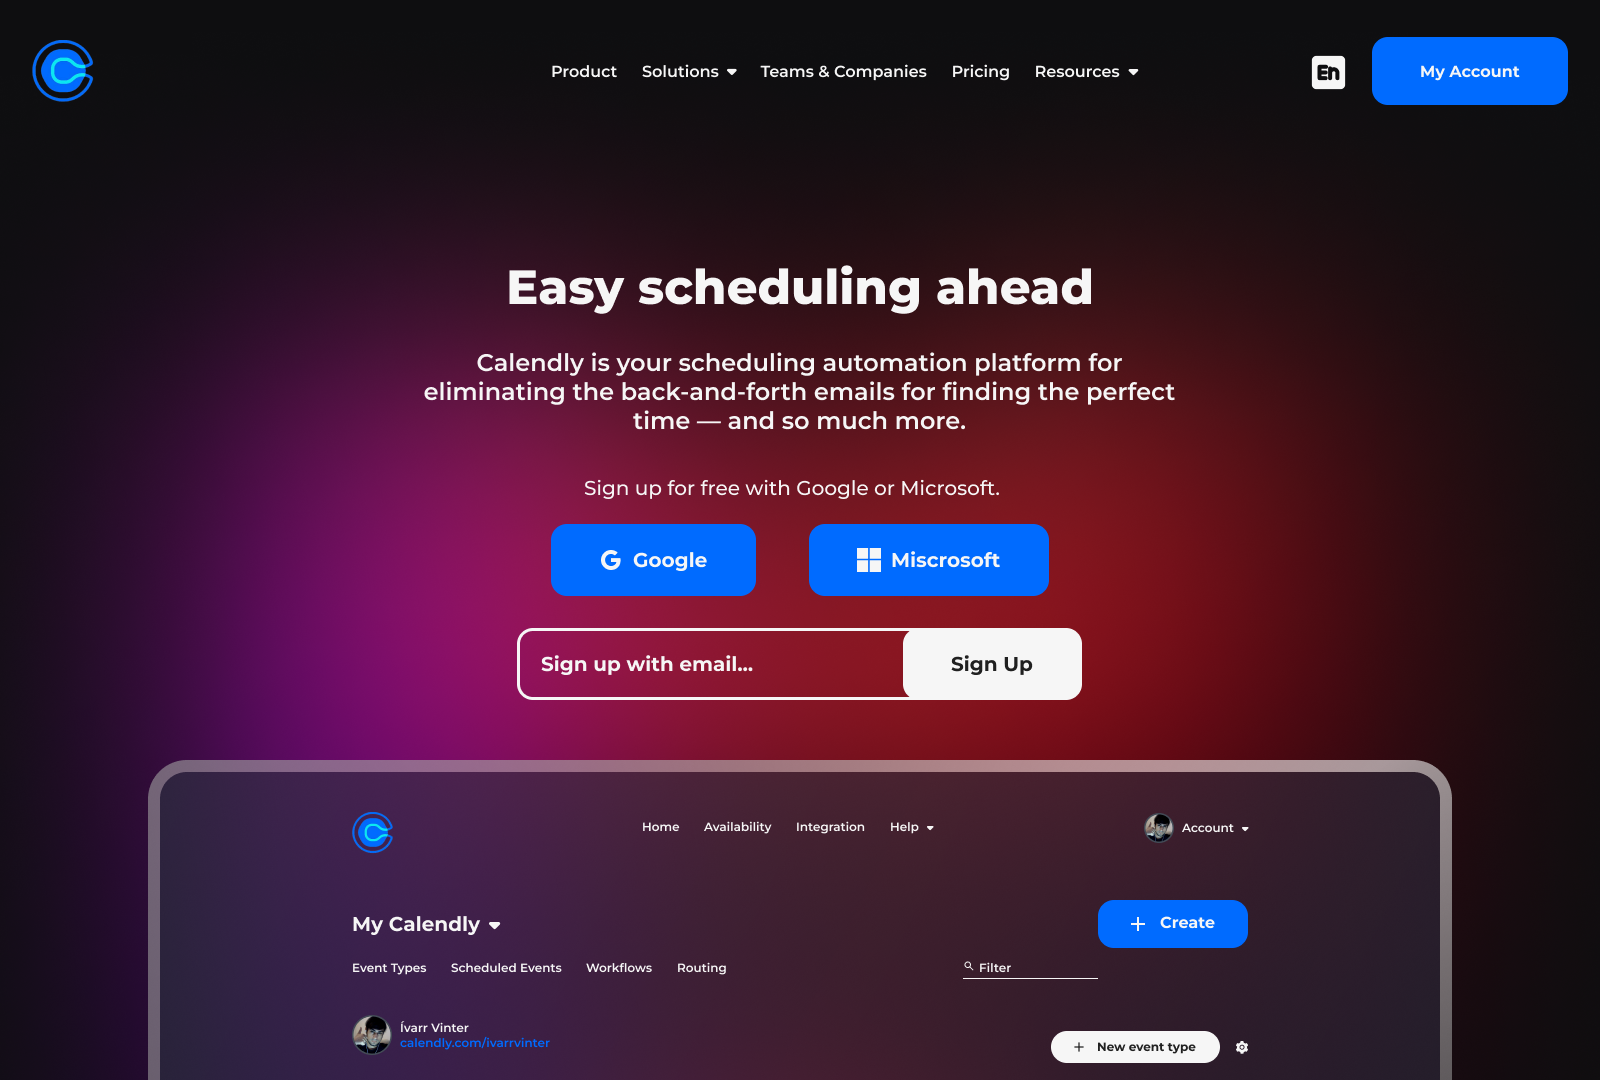 Calendly UI website design dribbble by Amirhossein Ghanipour on Dribbble